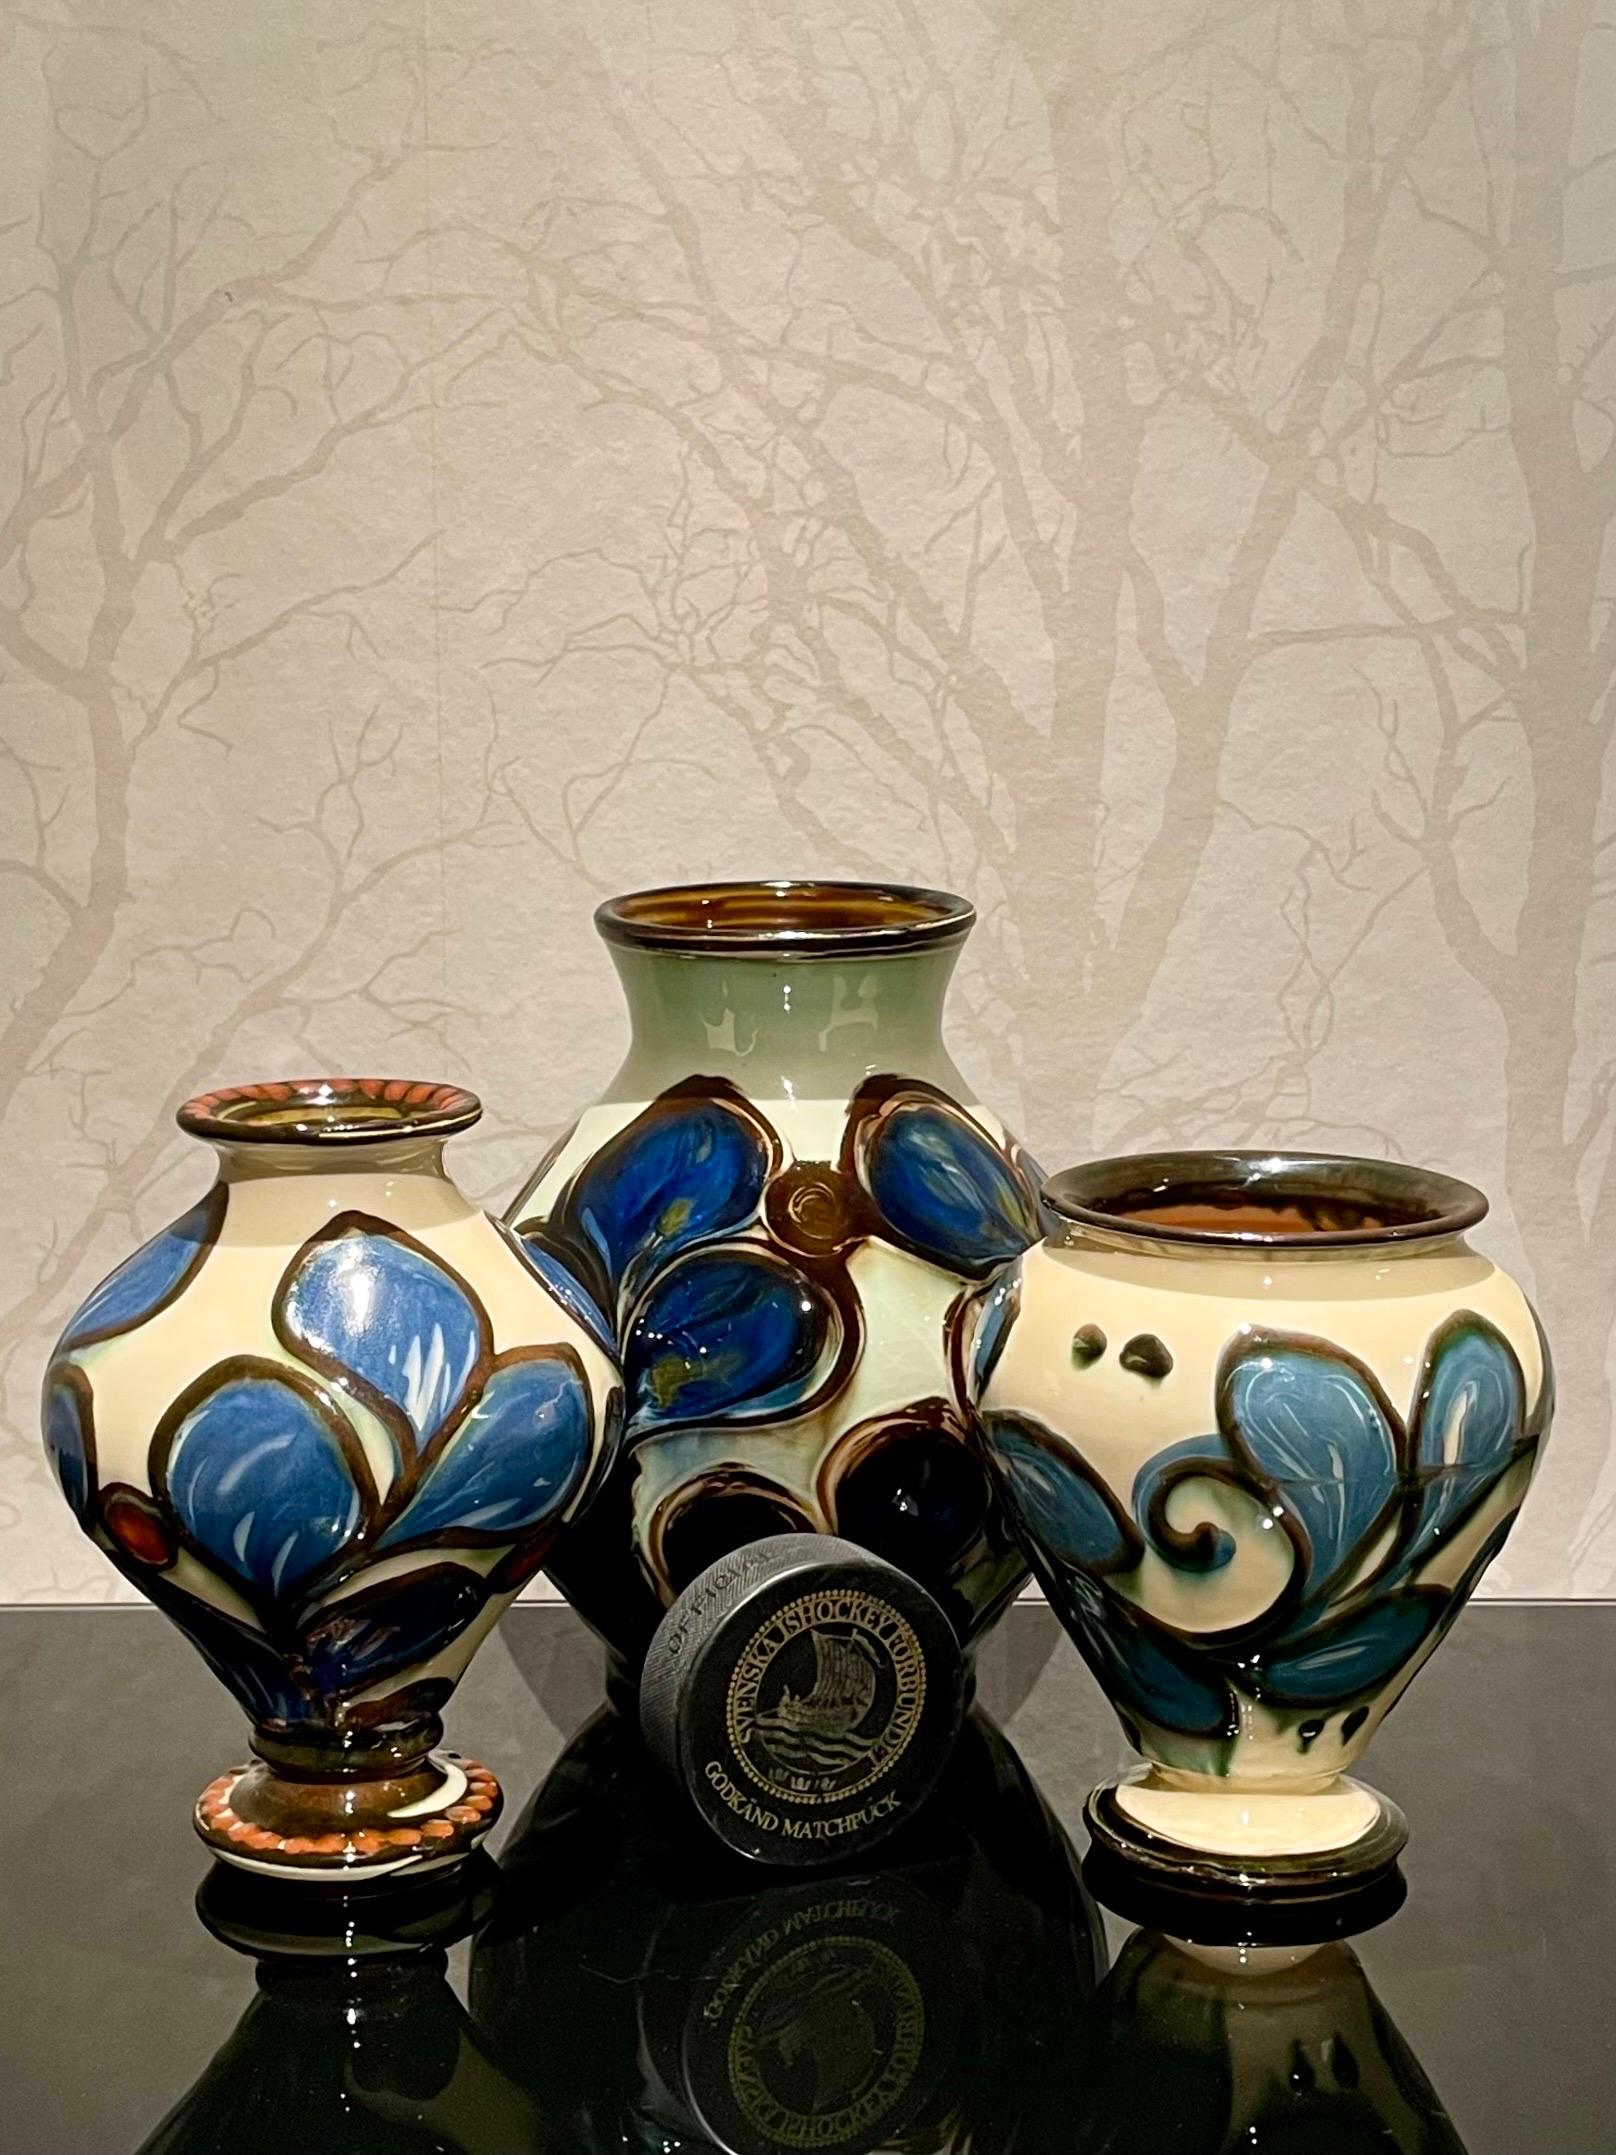 Danish Herman Kähler Ceramic Vase Collection from the 1920s in a Set of Three 11